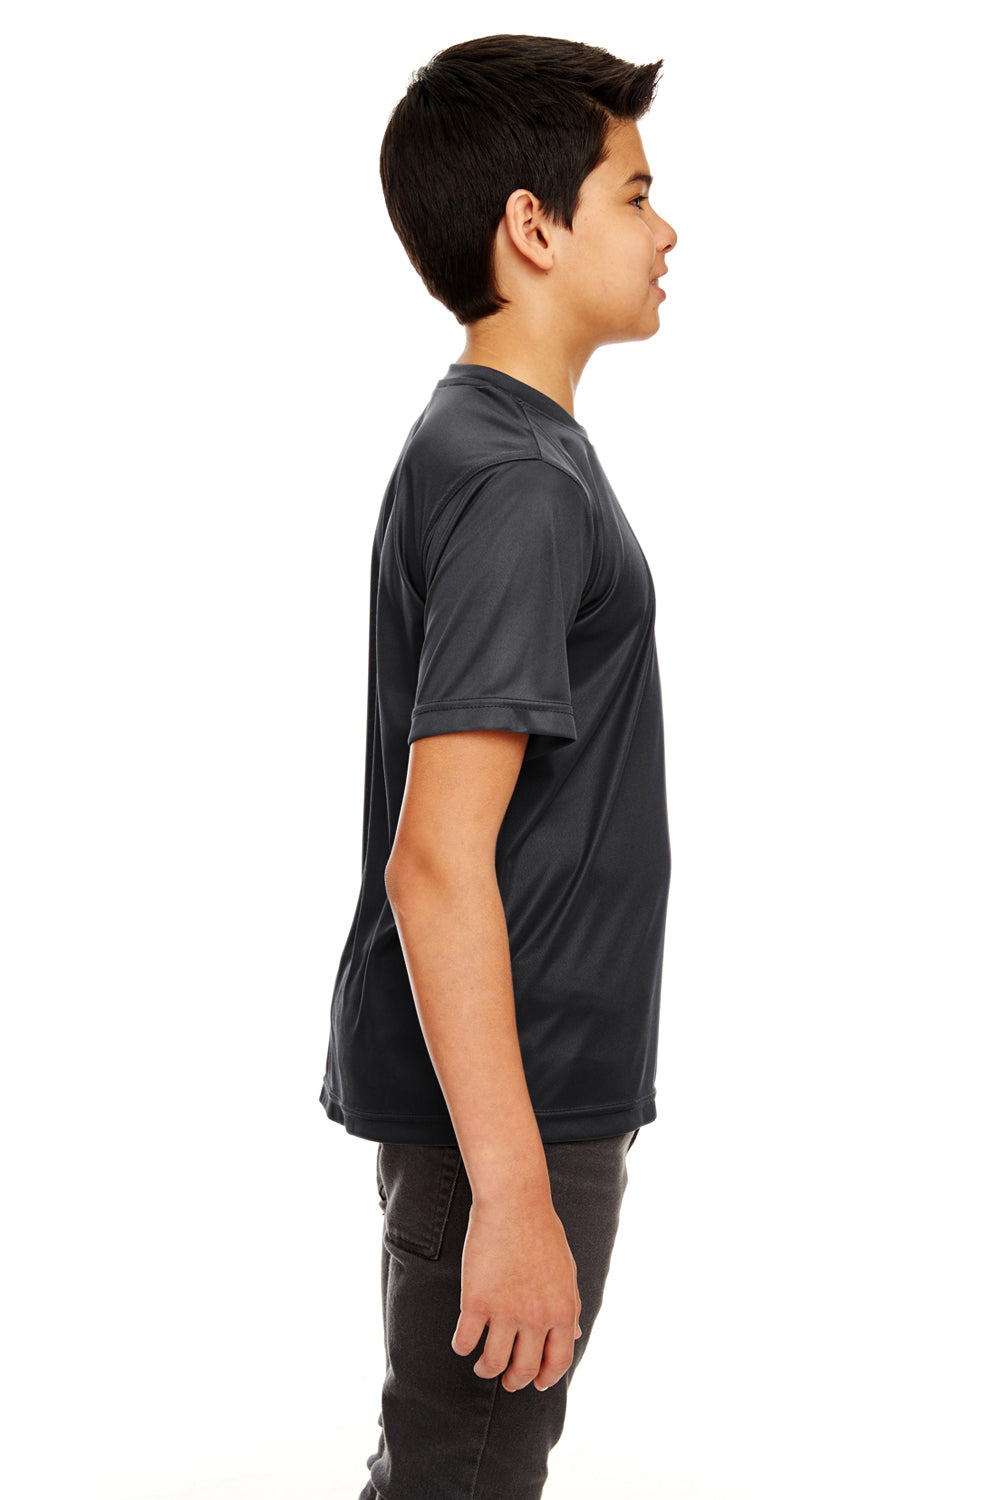 UltraClub 8420Y Youth Cool & Dry Performance Moisture Wicking Short Sleeve Crewneck T-Shirt Black Side